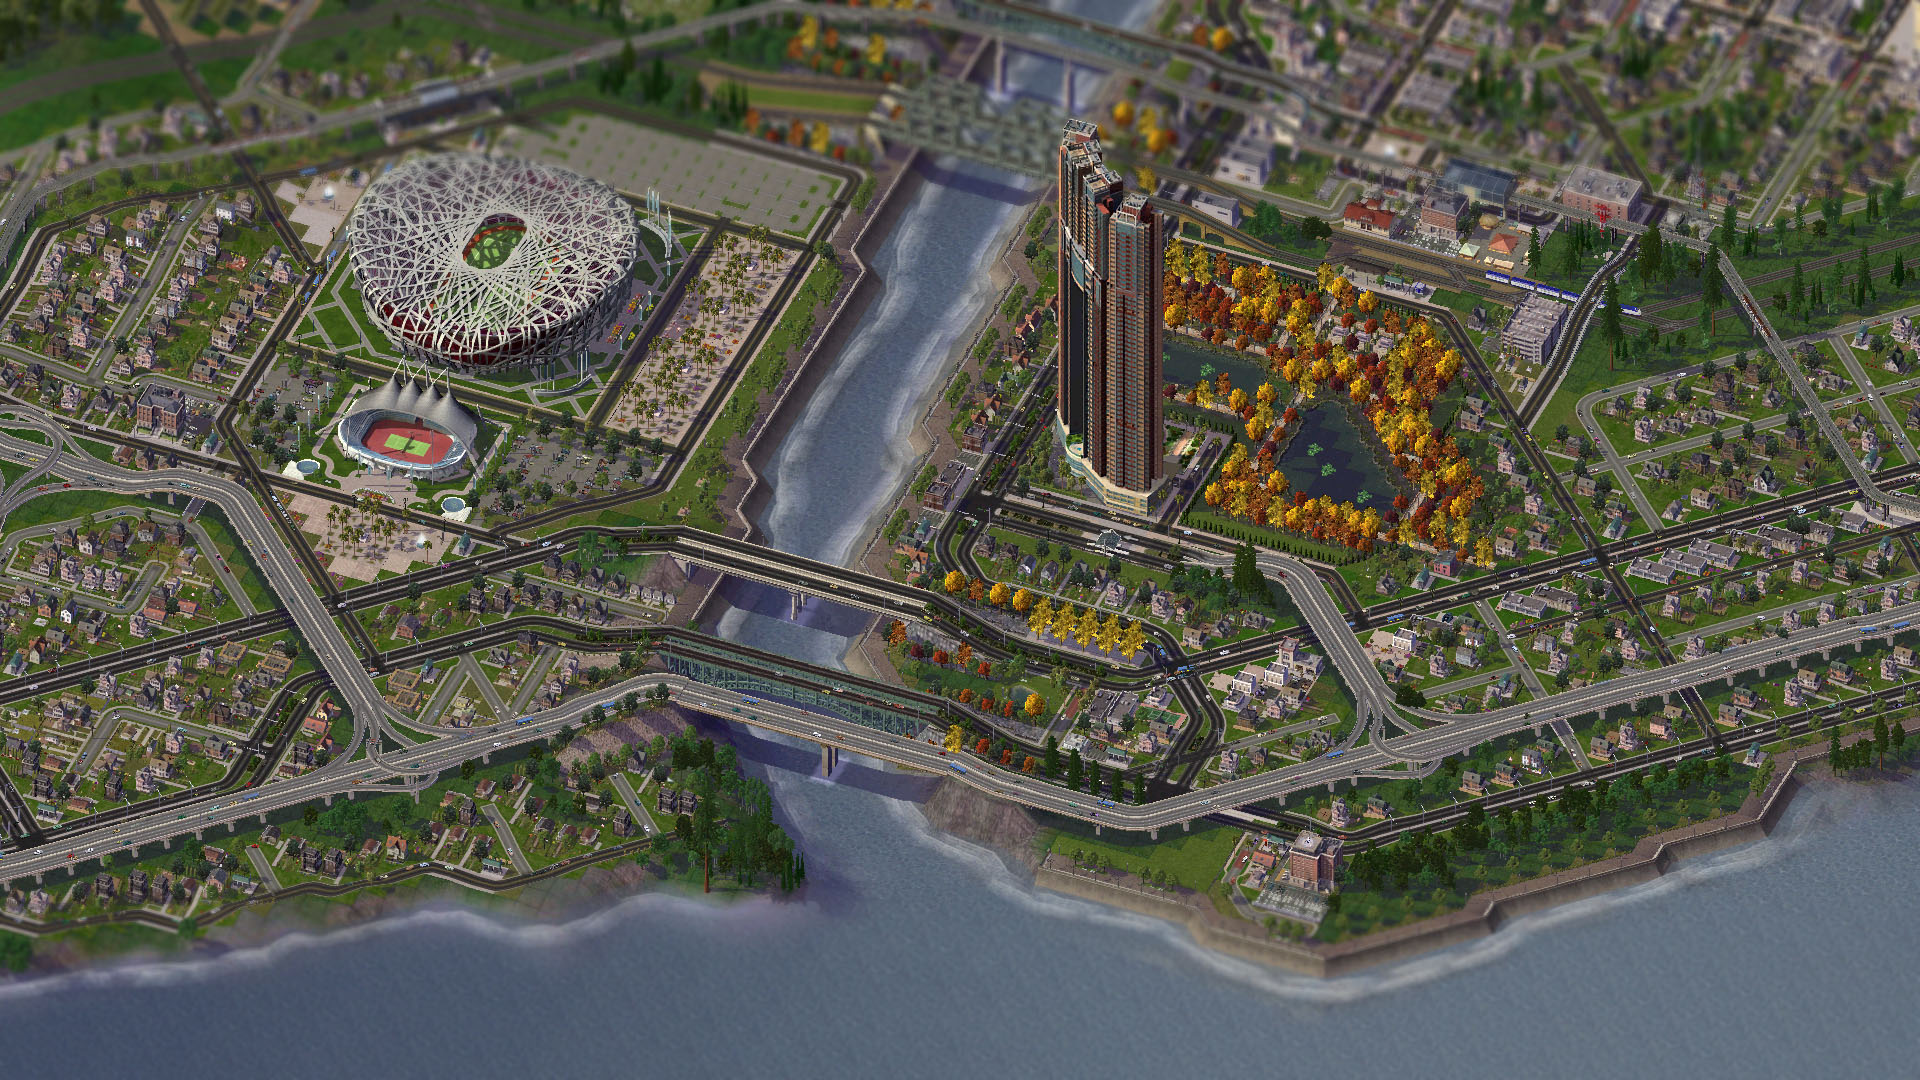 Simcity Complete Edition Download